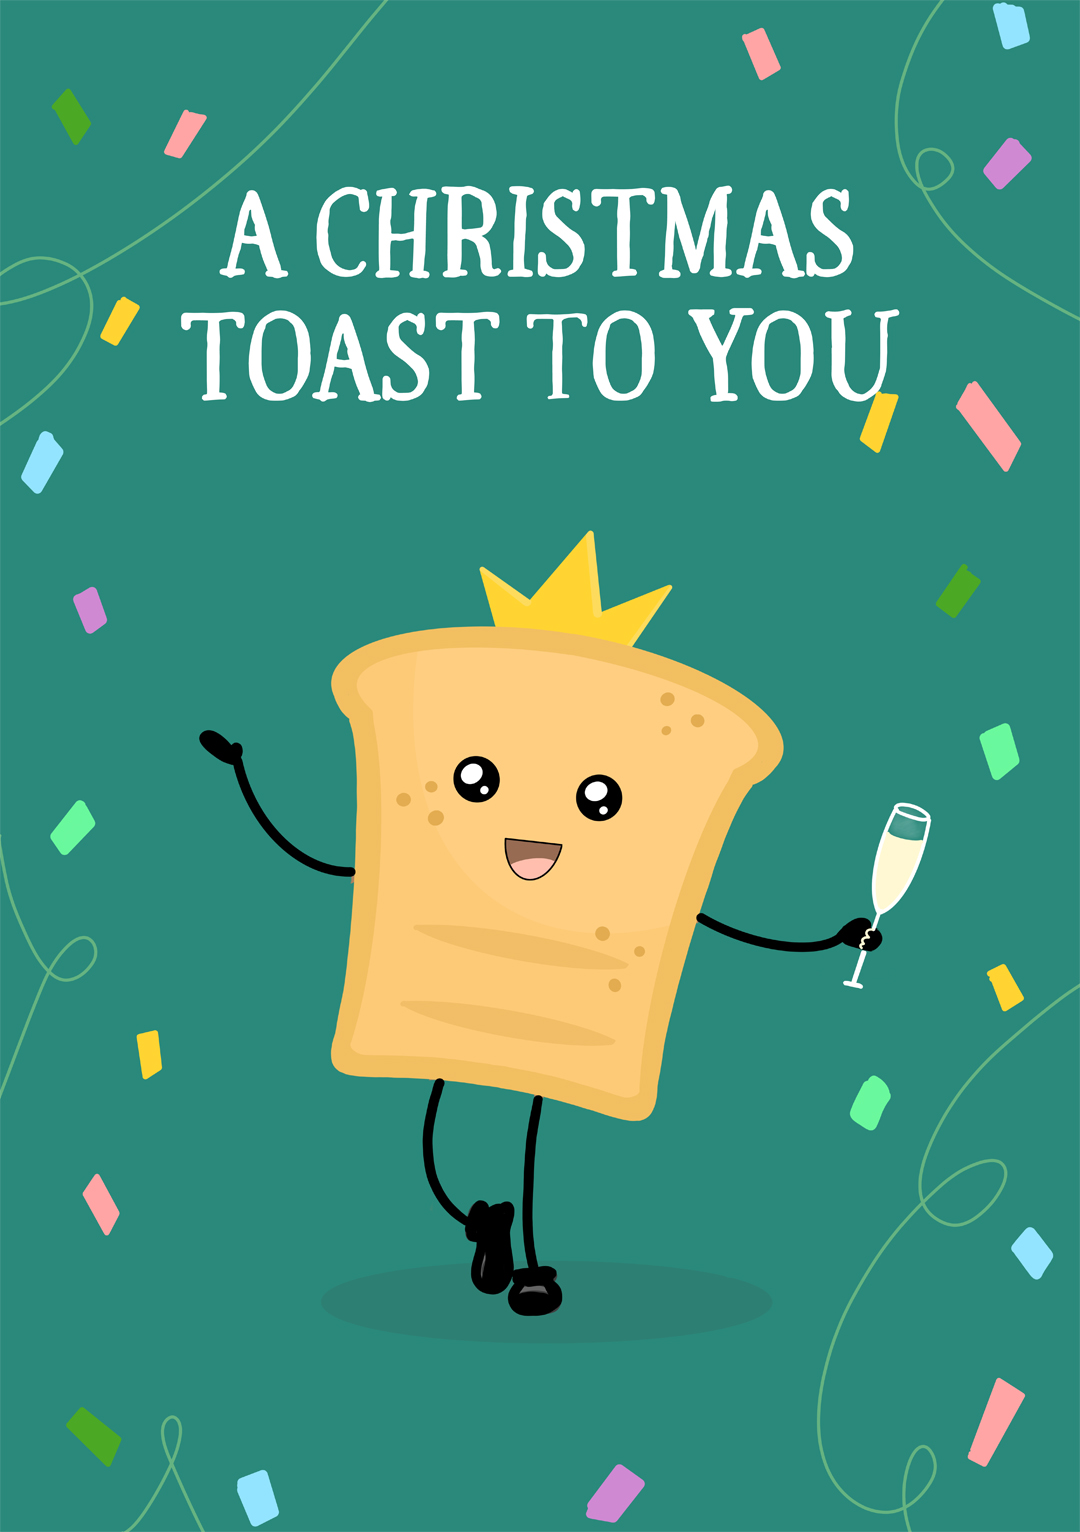 A Christmas Toast To You Greetings Card